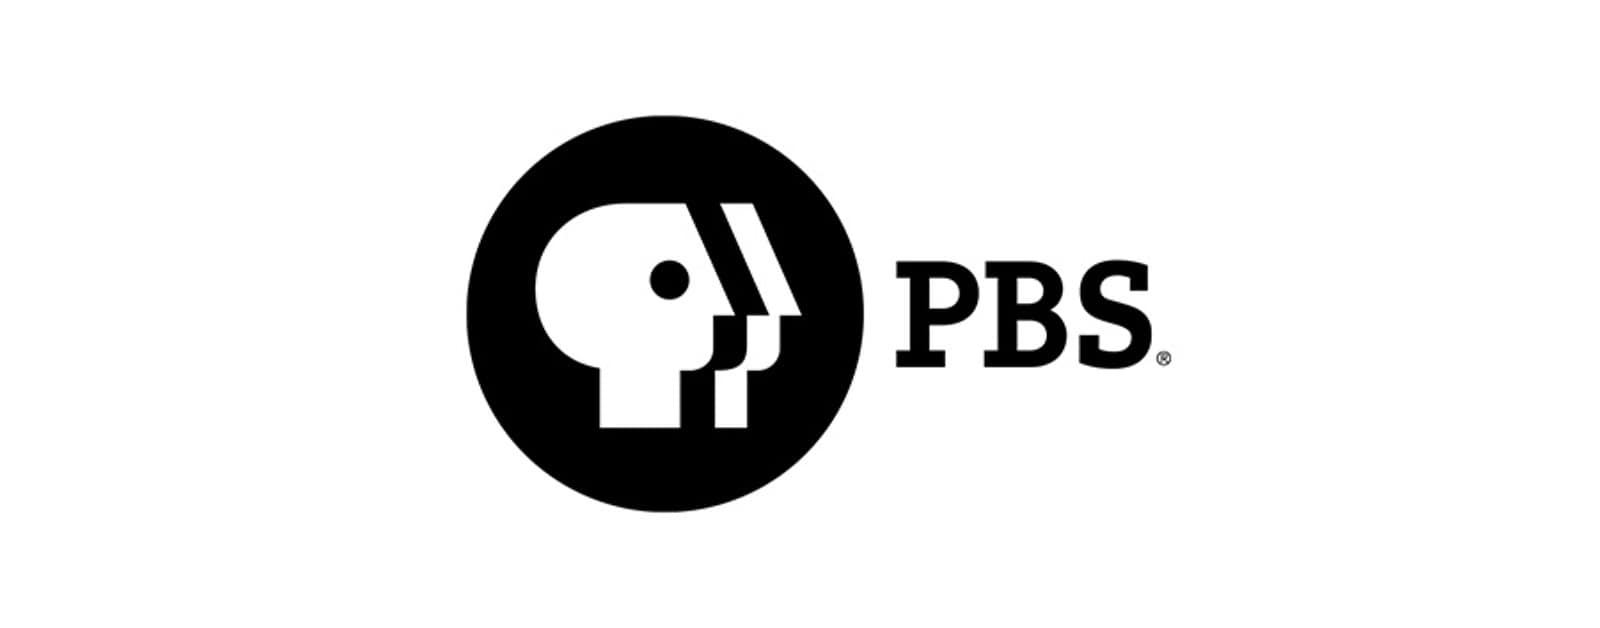 Rural PBS Just Got Saved by T-Mobile